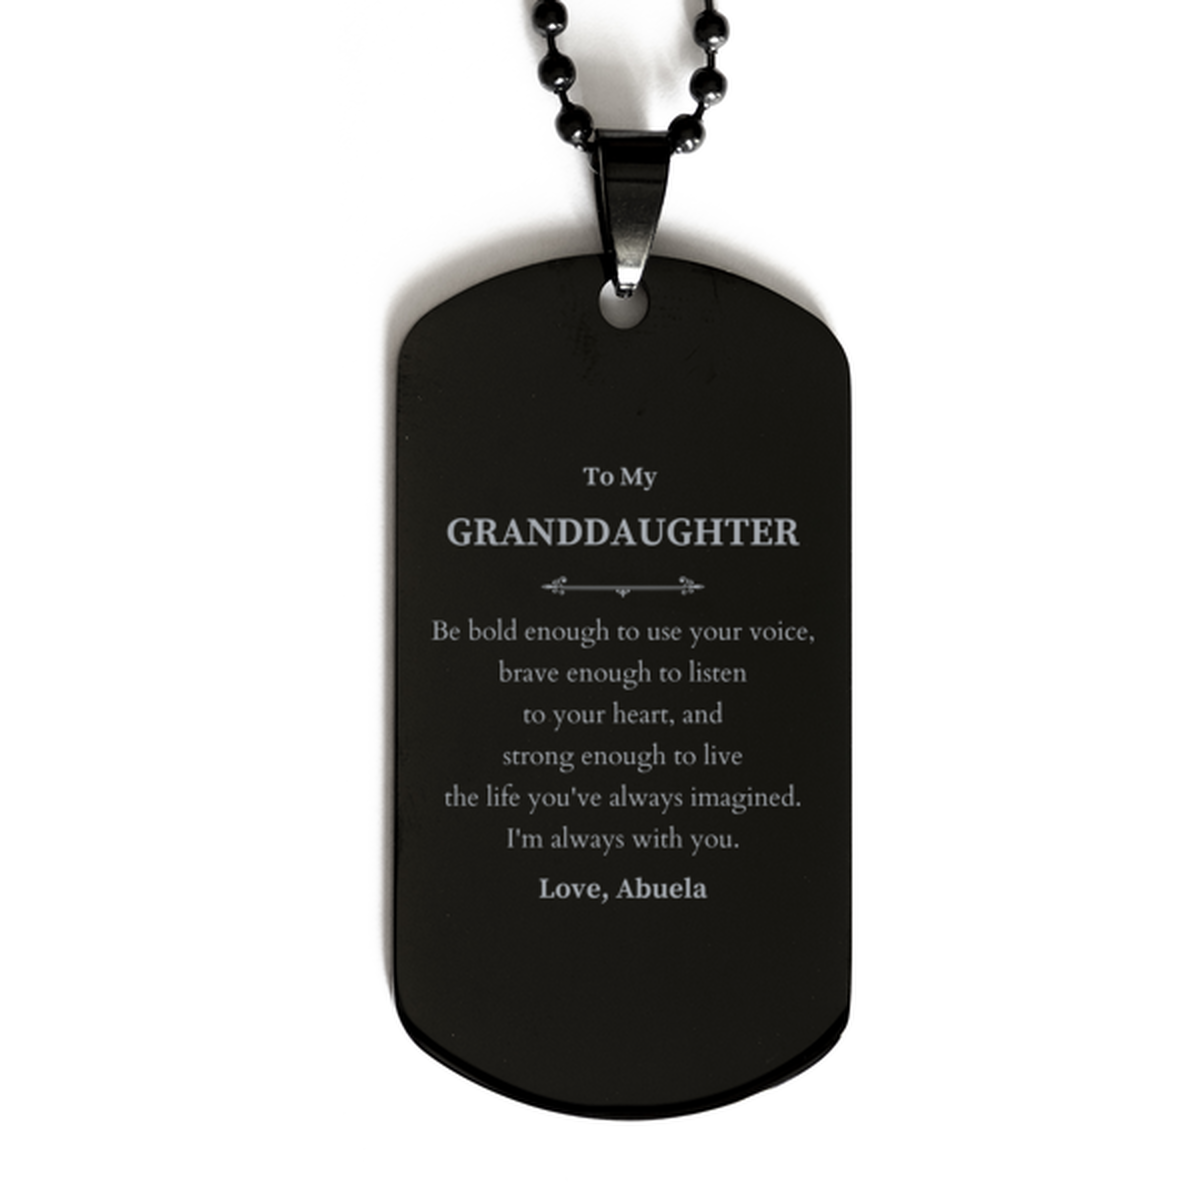 Keepsake Granddaughter Black Dog Tag Gift Idea Graduation Christmas Birthday Granddaughter from Abuela, Granddaughter Be bold enough to use your voice, brave enough to listen to your heart. Love, Abuela